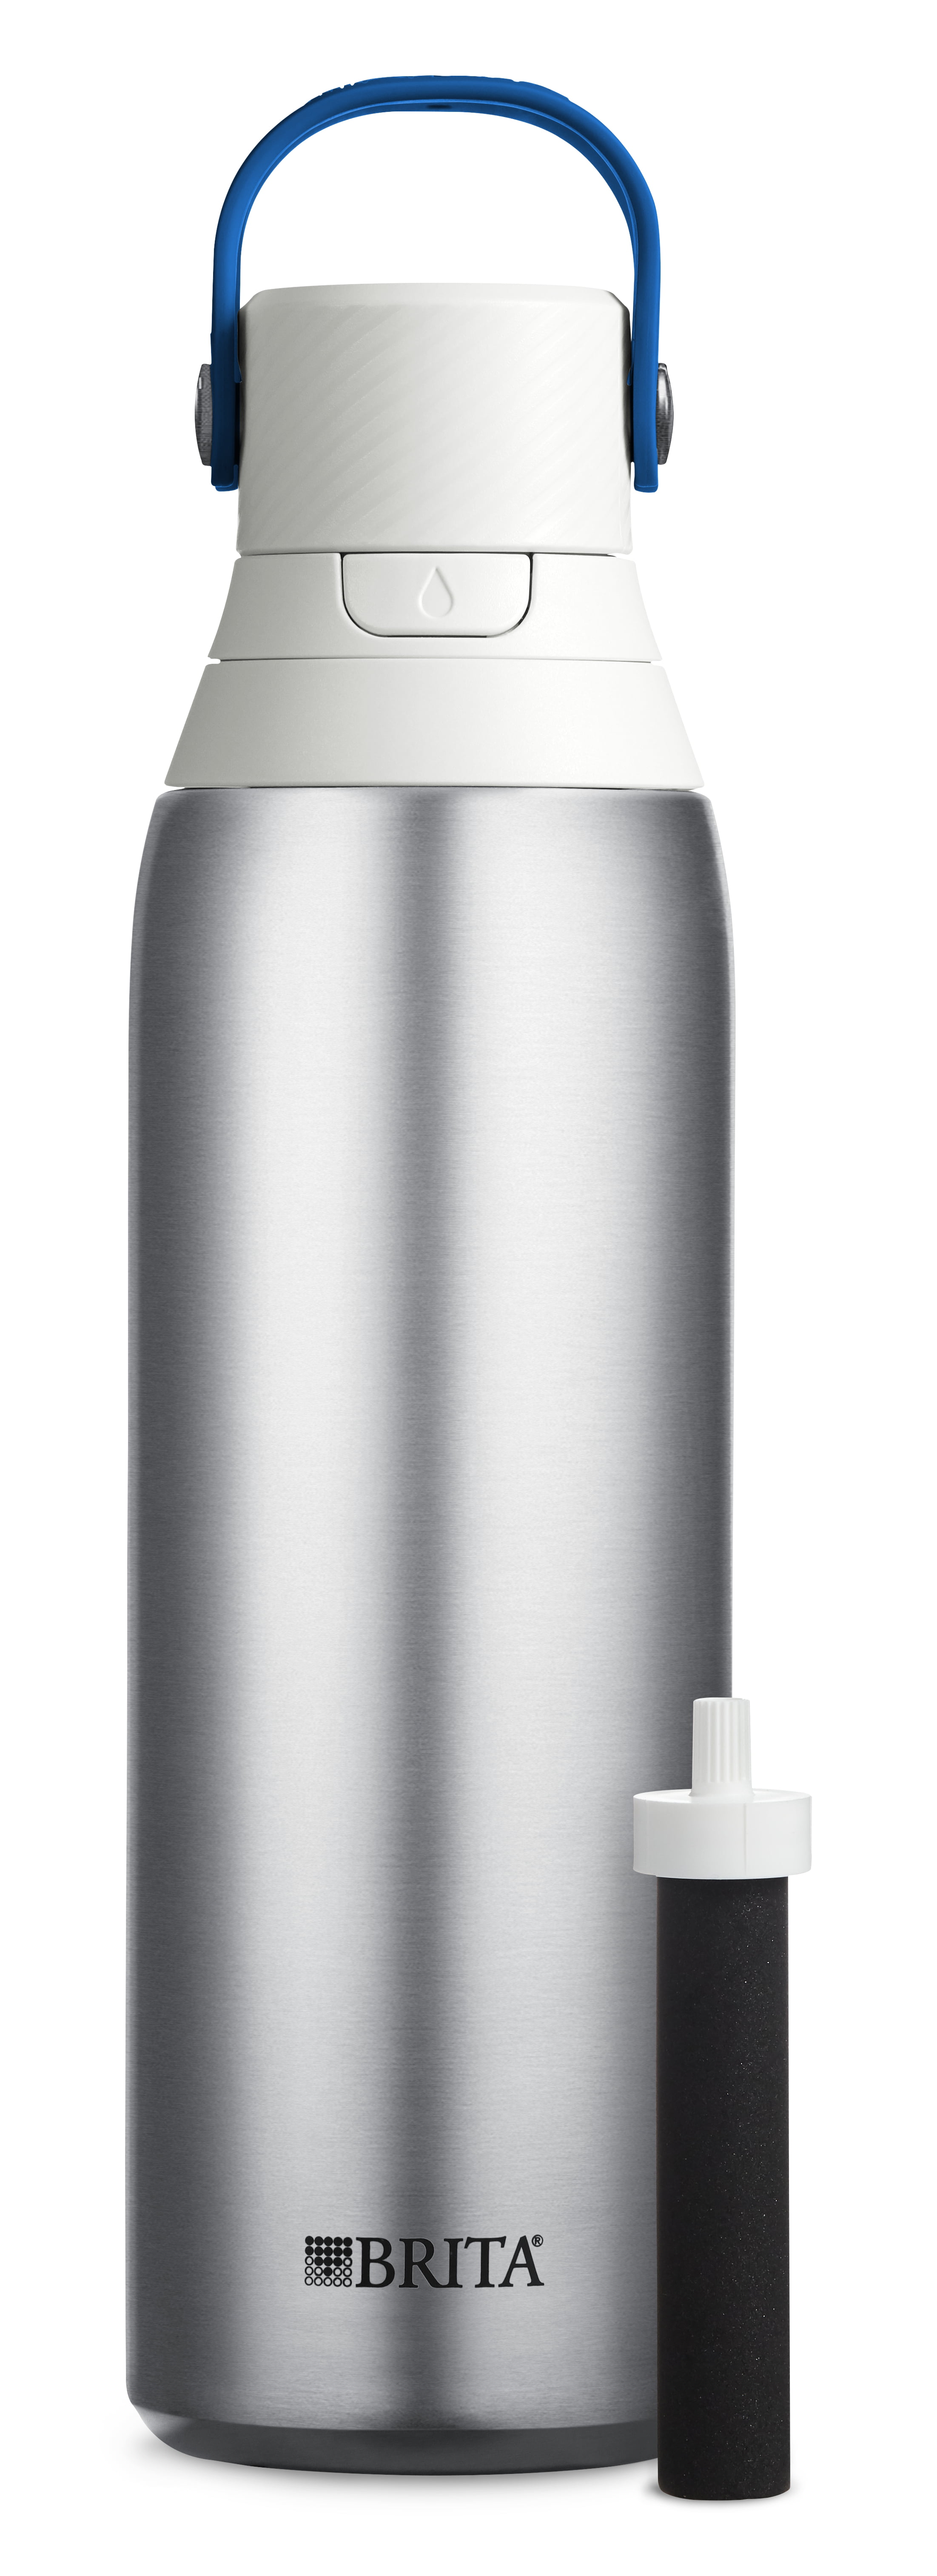 Brita 20 Ounce Premium Filtering Water Bottle with Filter - Double Wall Brita Stainless Steel Water Bottle With Filter